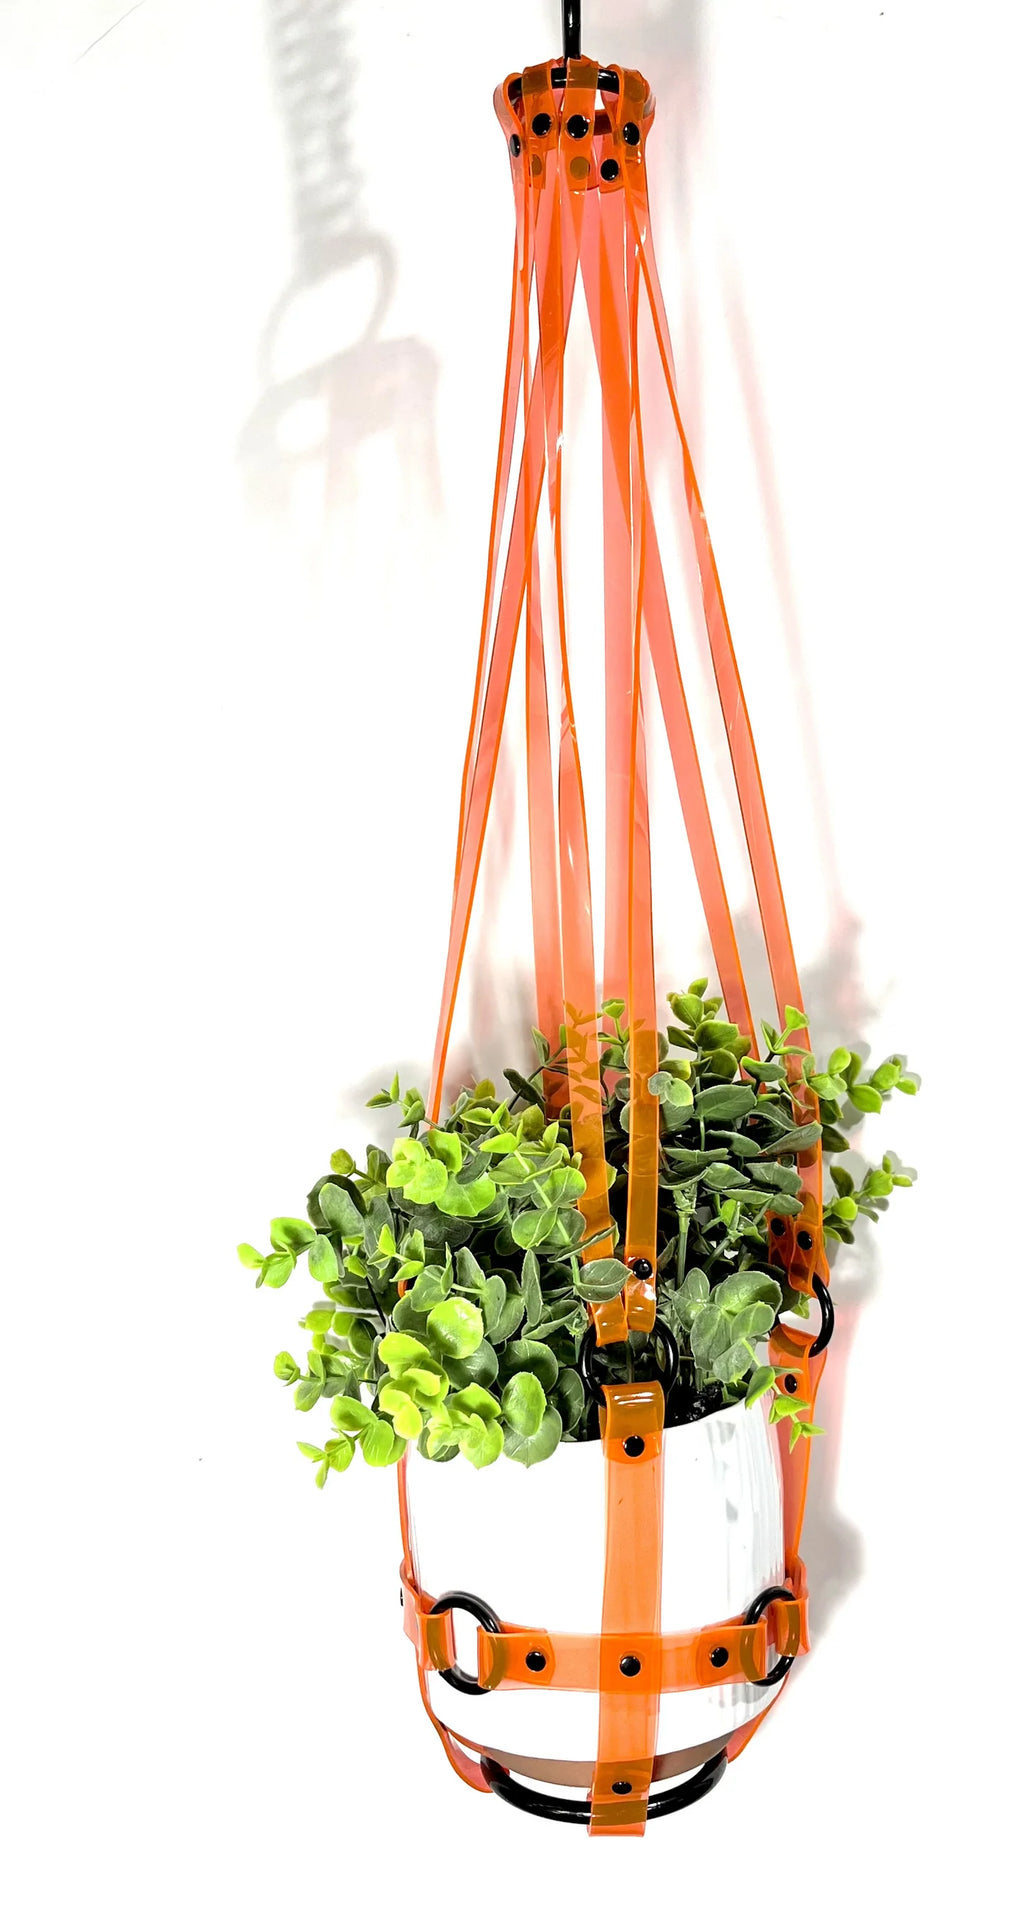 Basic Bitch 6" Plant Hanger in Clear Orange by Puritan Candy